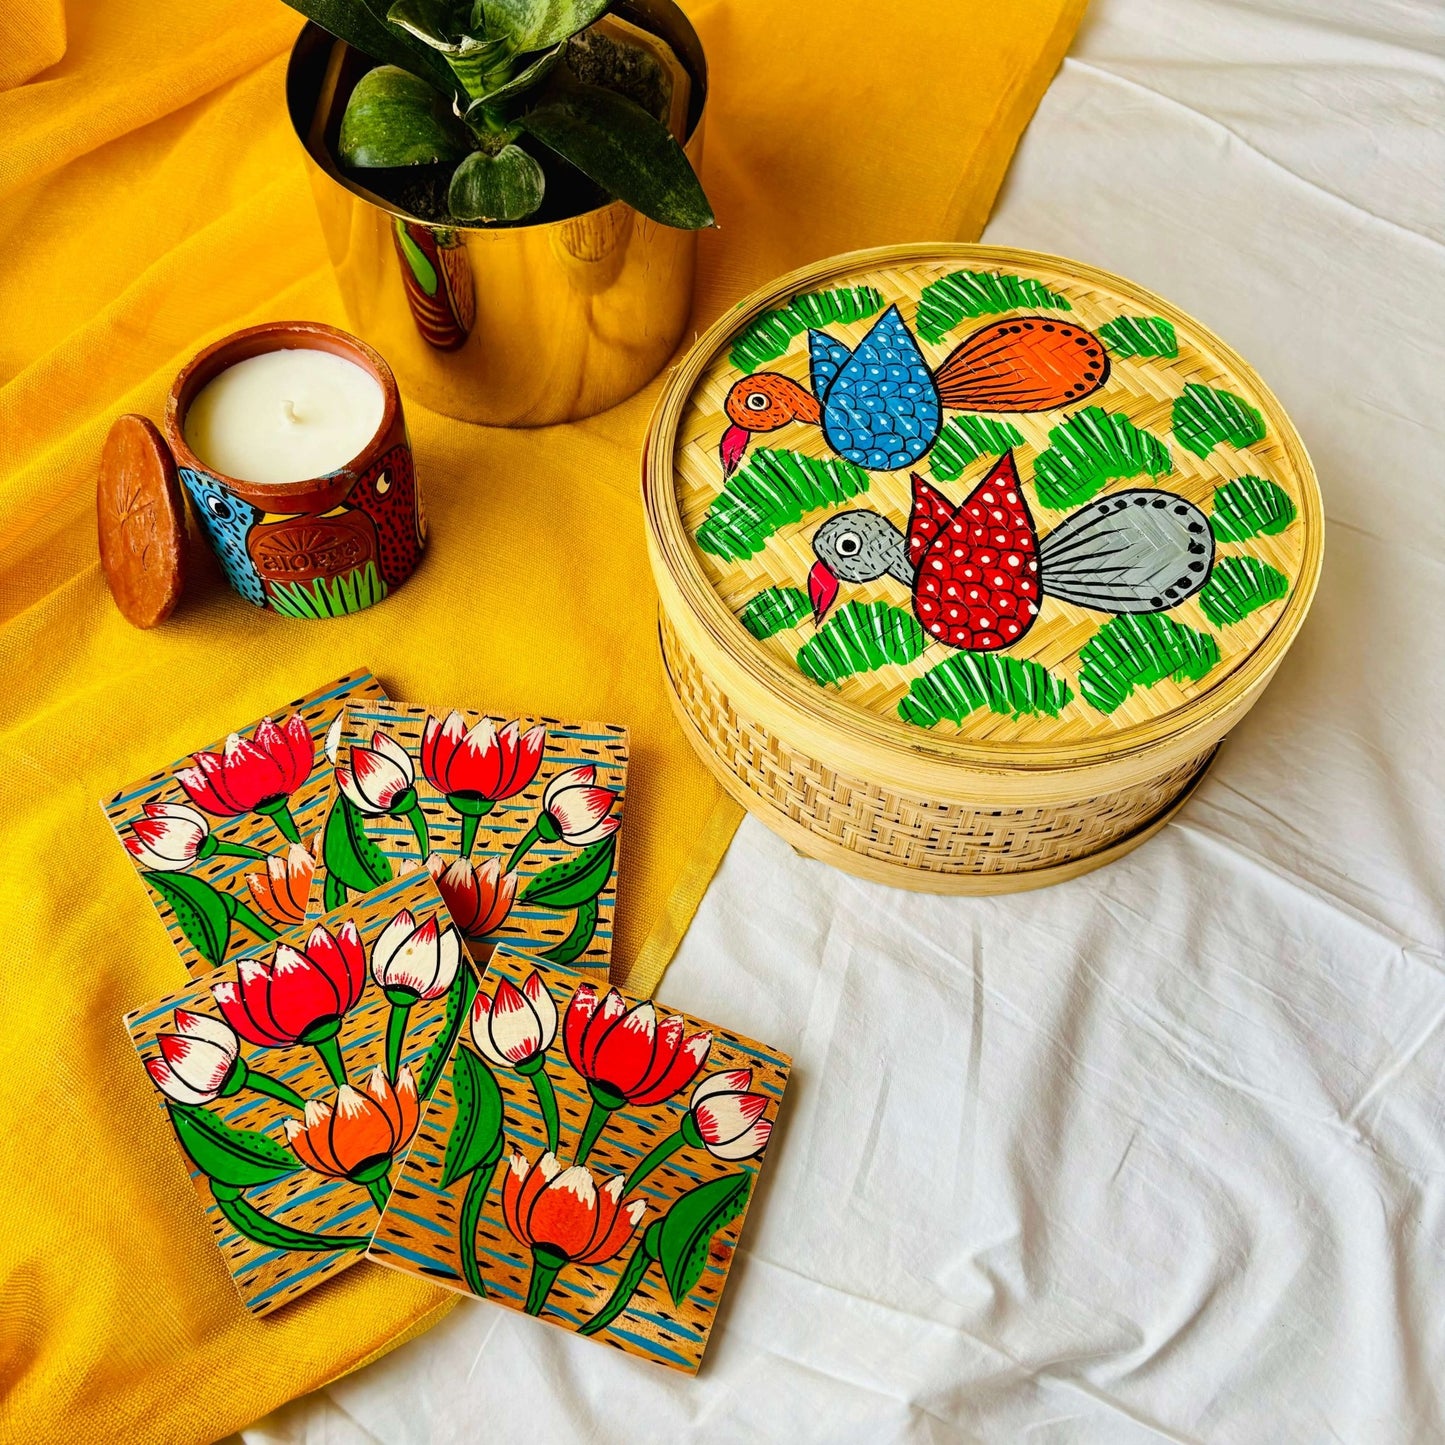 One handwoven bamboo fruit box with a motif of two birds flying over a field, a set of four square wood coasters with a motif of lotus and a double wick scented candle with a bird motif displaced against a yellow background with a plant pot beside them